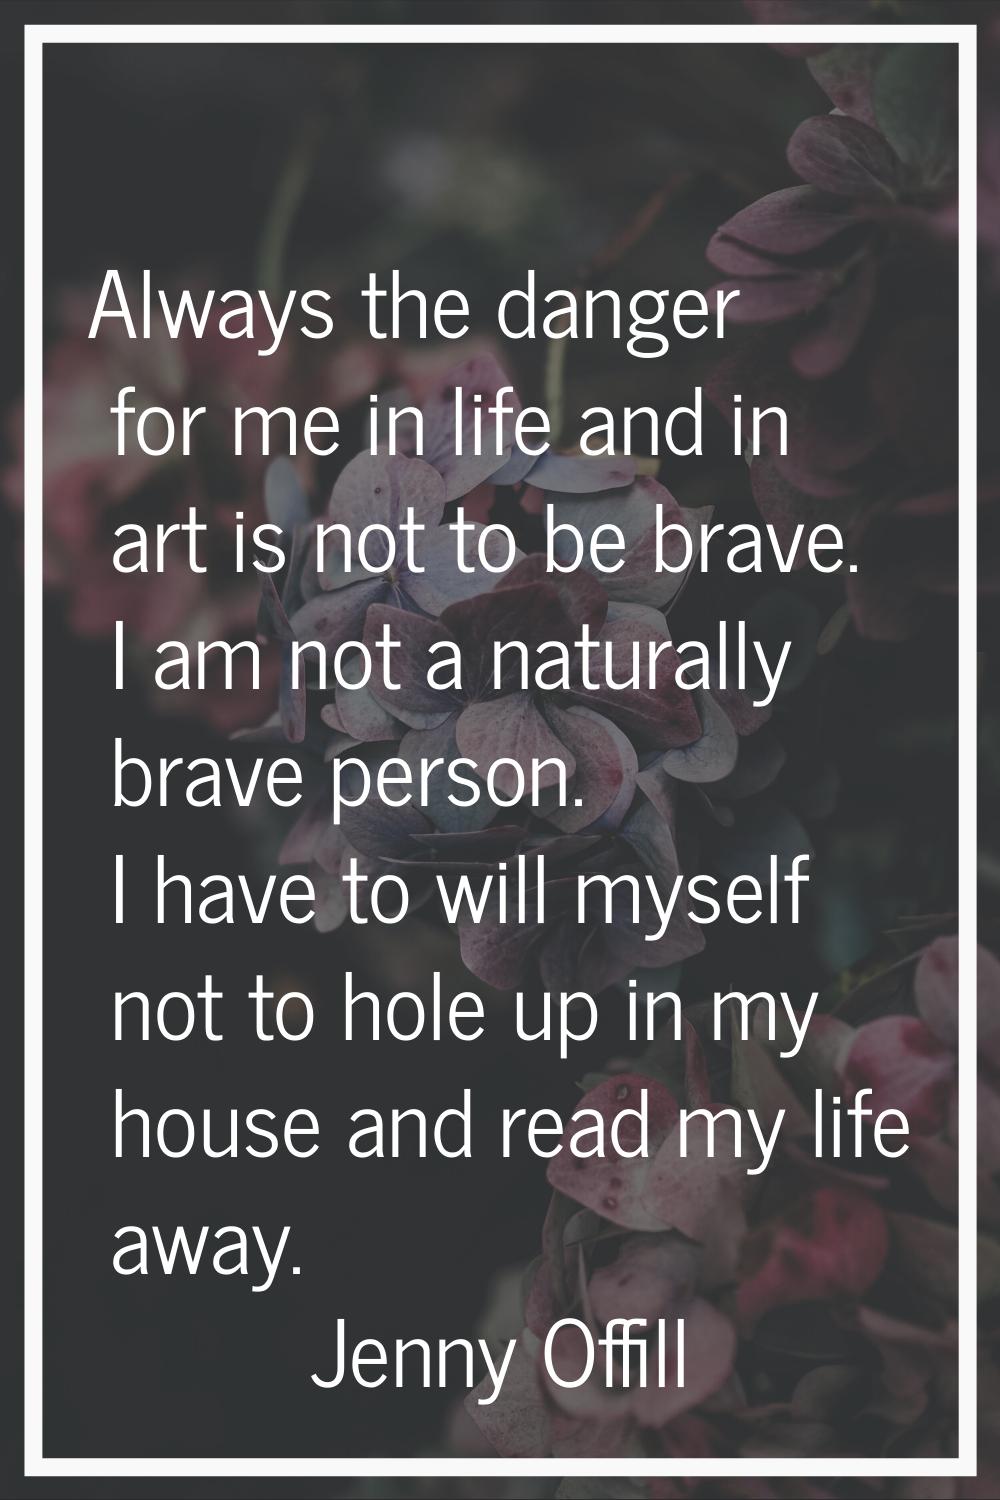 Always the danger for me in life and in art is not to be brave. I am not a naturally brave person. 